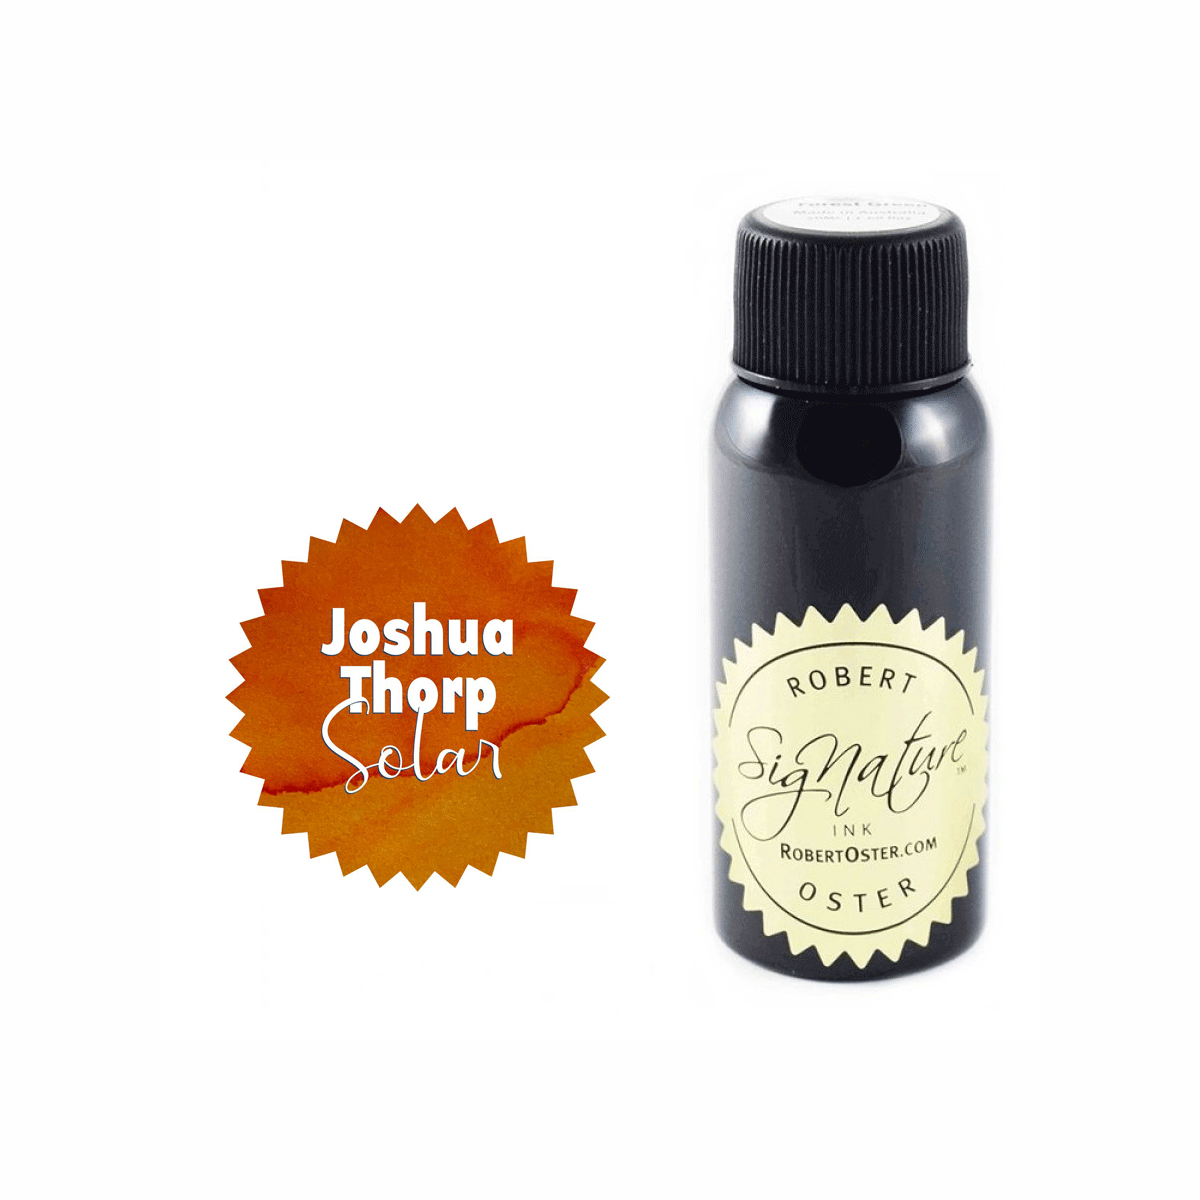 Robert Oster Signature Ink Bottle Joshua Thorp Solar - Pencraft the boutique